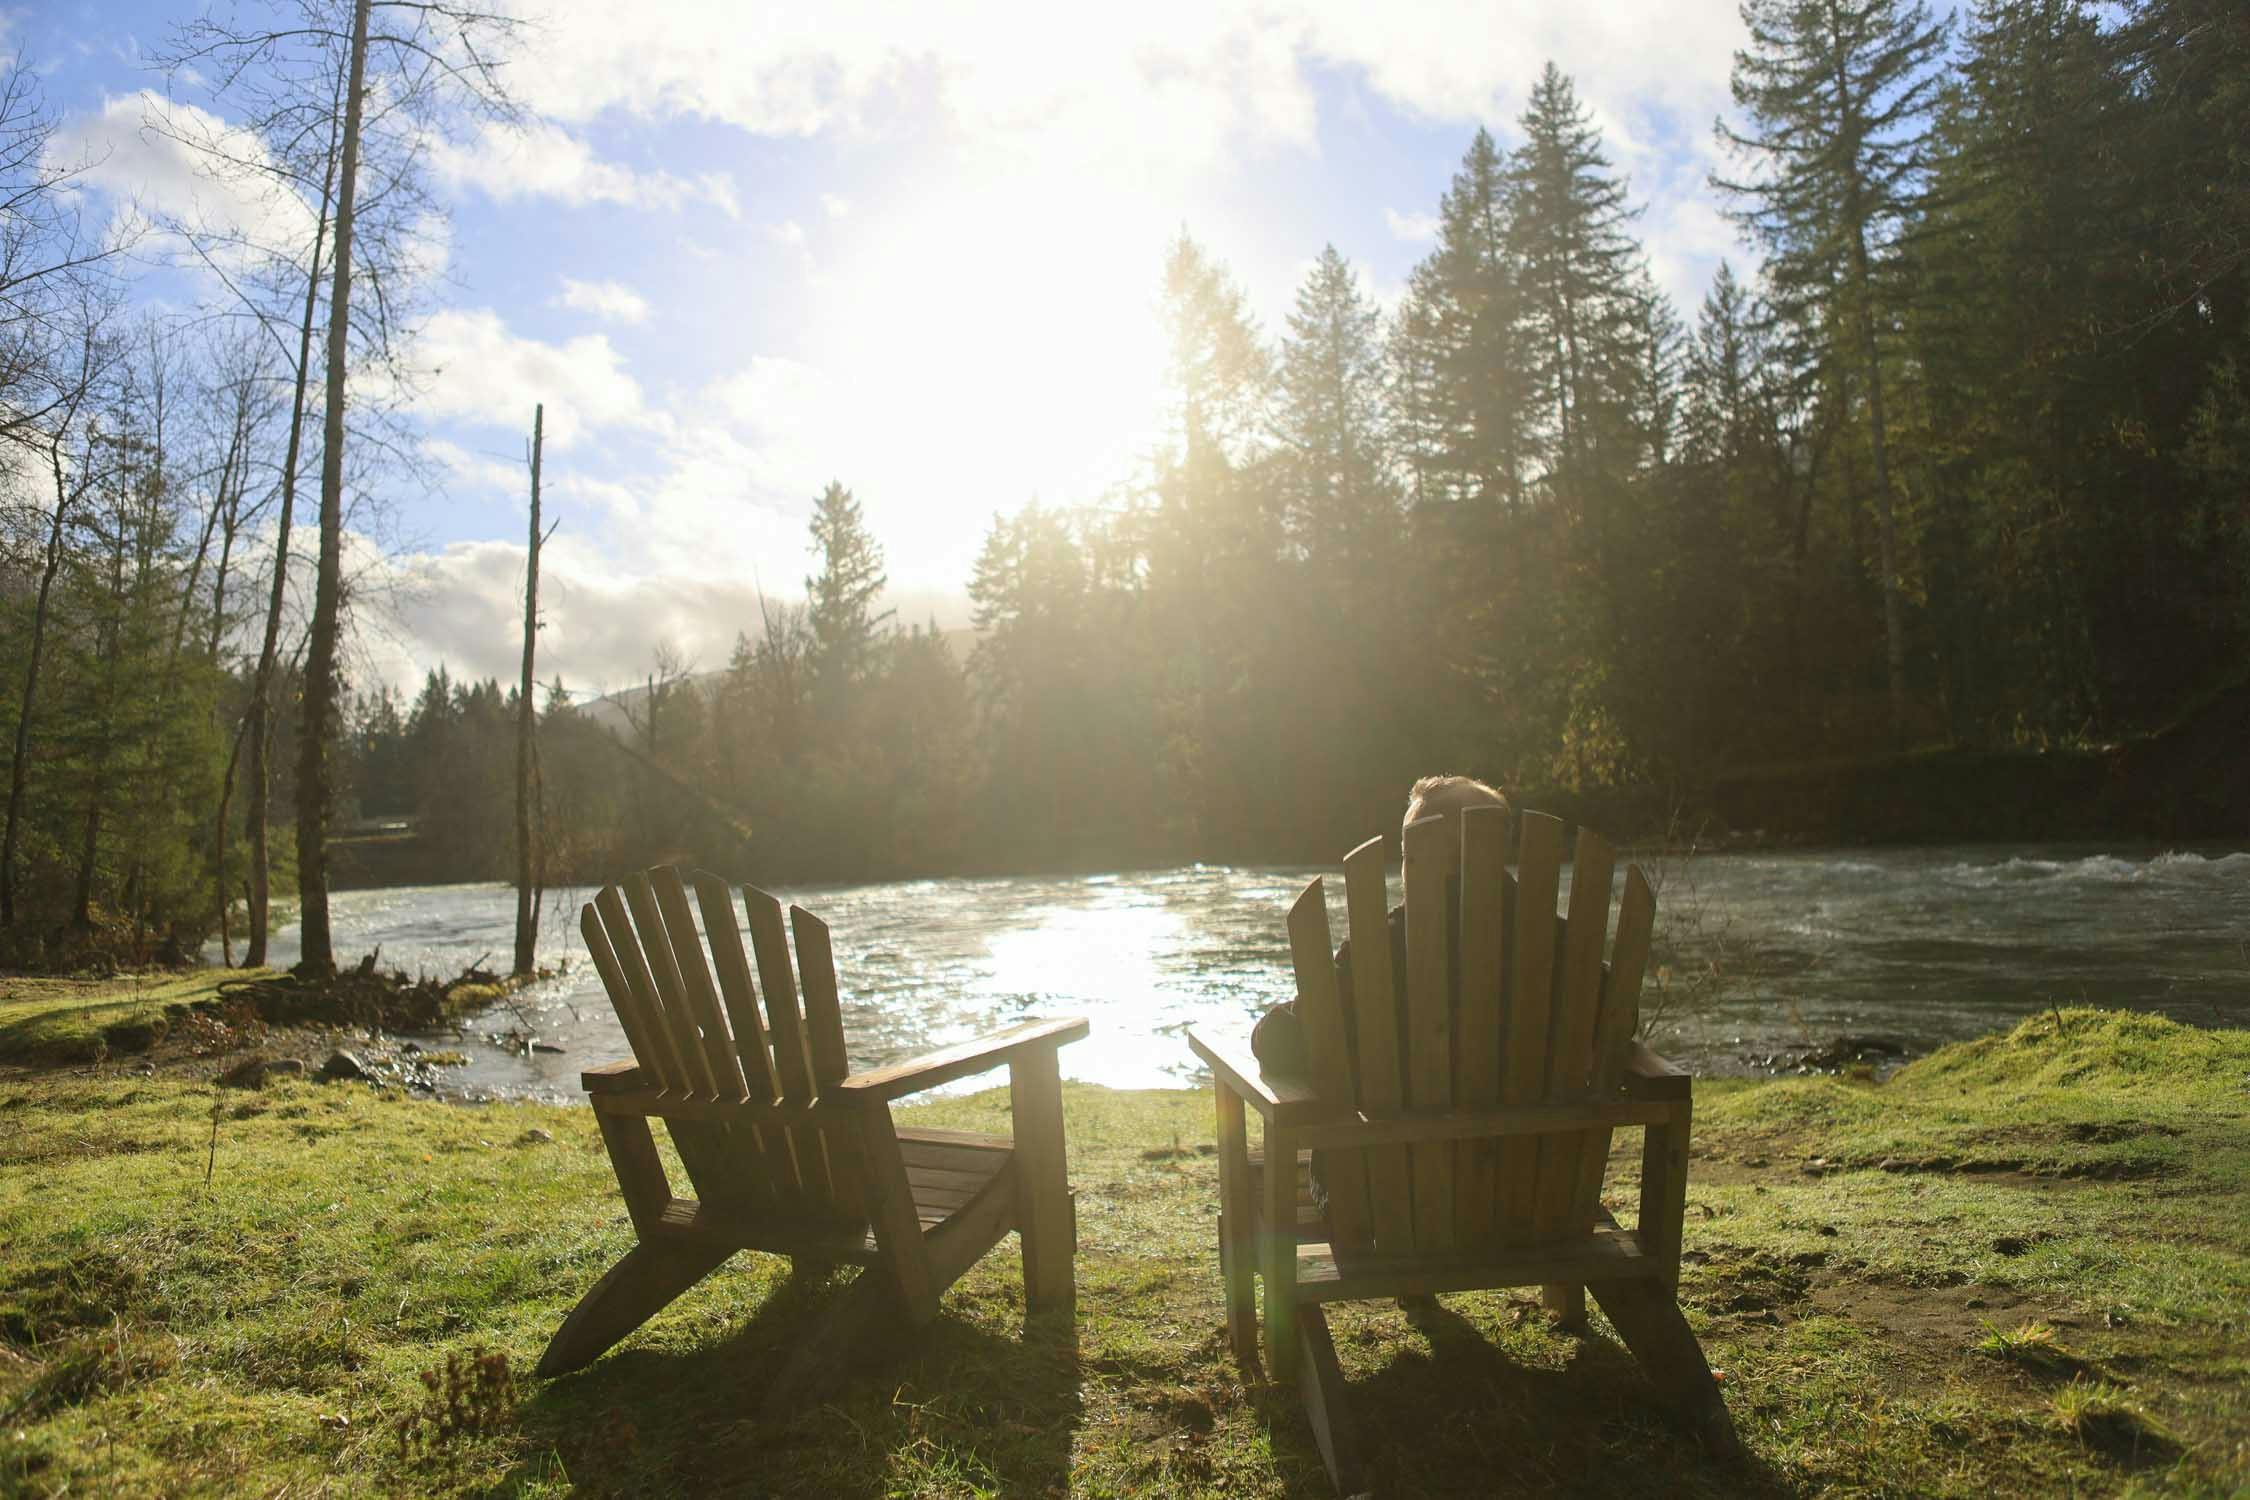 A photo of two wooden chairs facing the river with the sun shining and sparkling reflections on the water